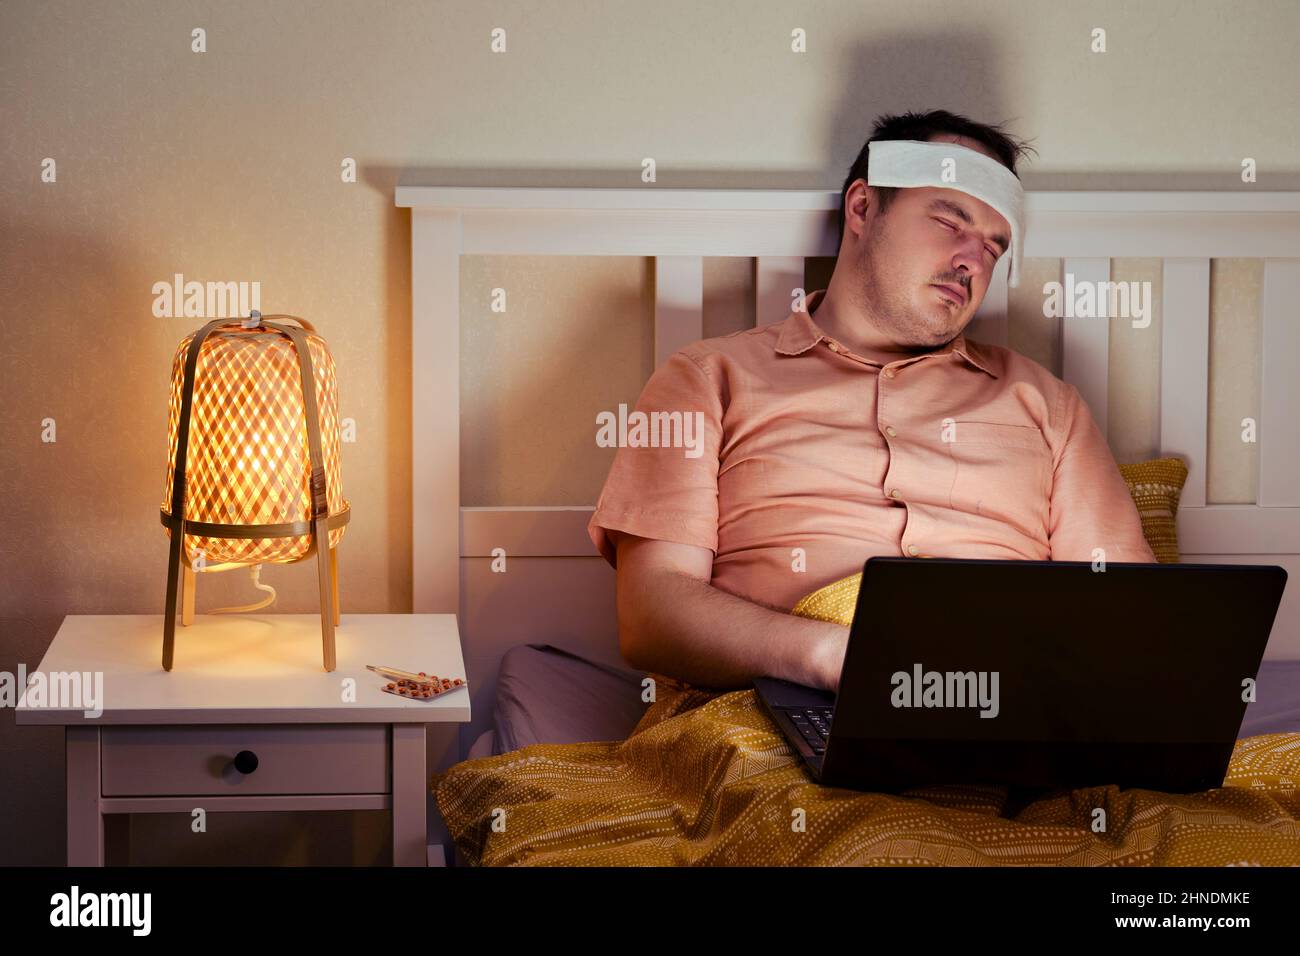 Adult sick man sleeping tiredly lying on bed with computer Stock Photo